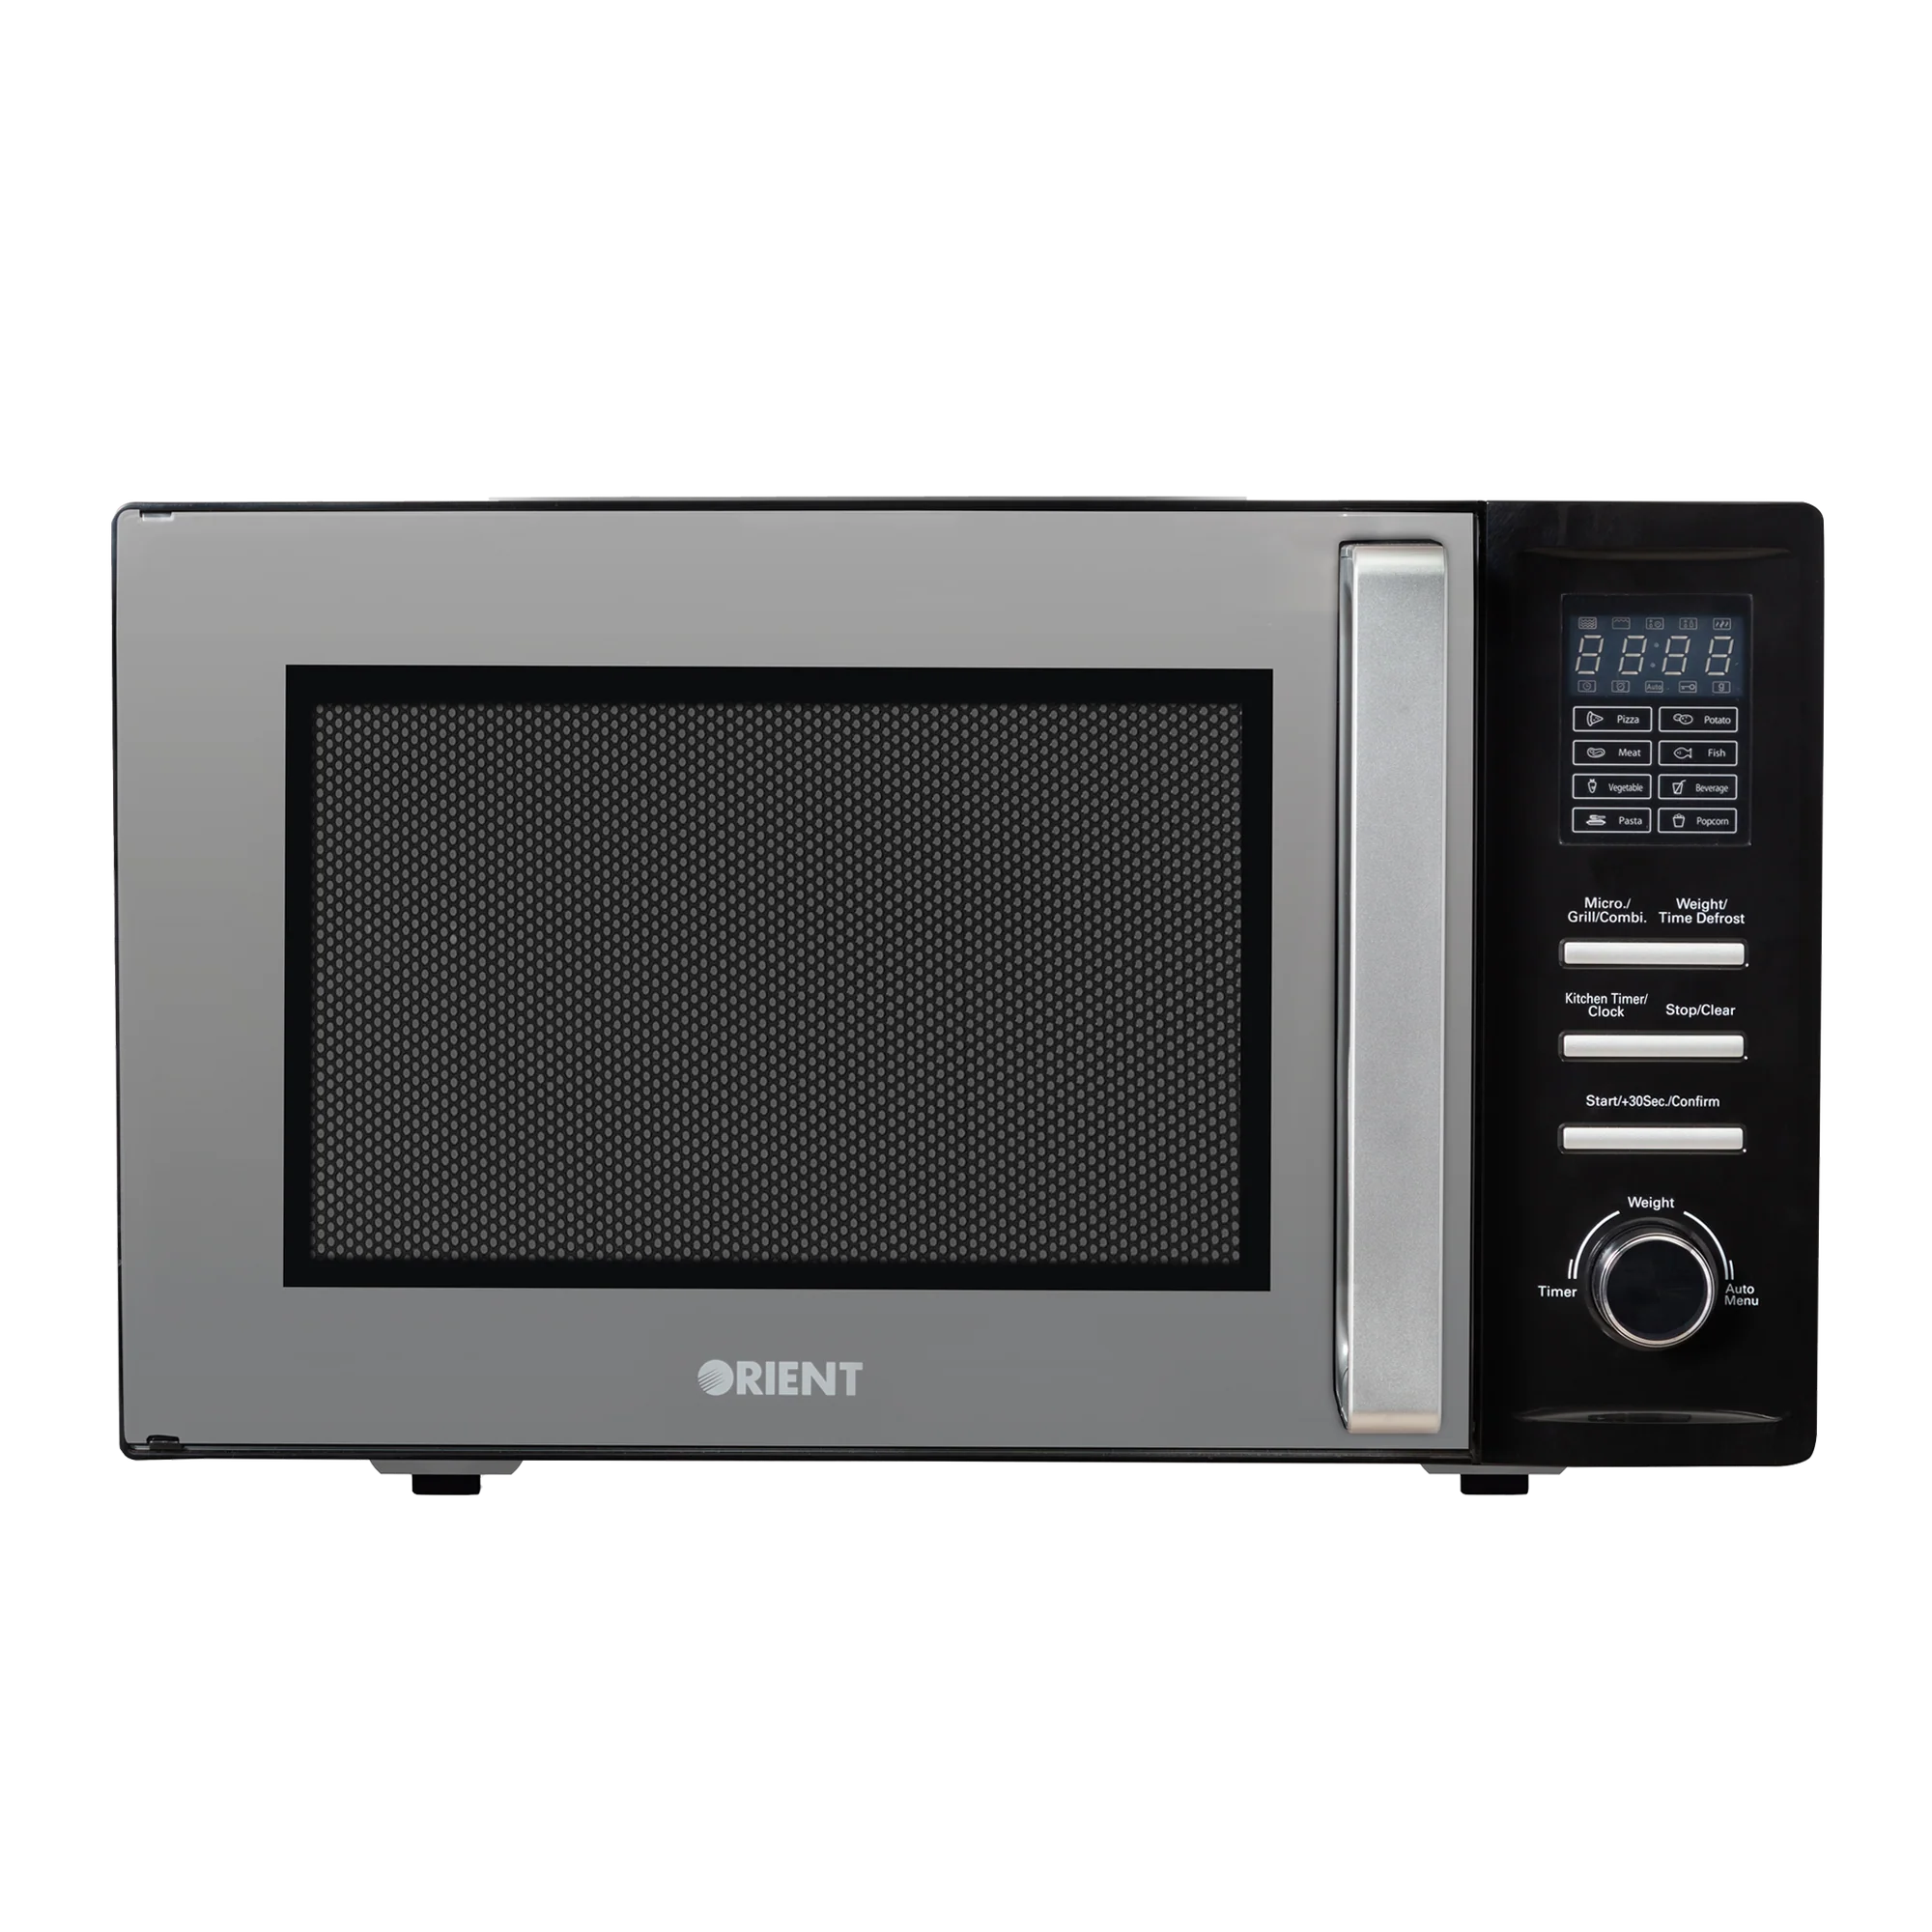 ORIENT PIZZA 34D GRILL MICROWAVE OVEN | Centre